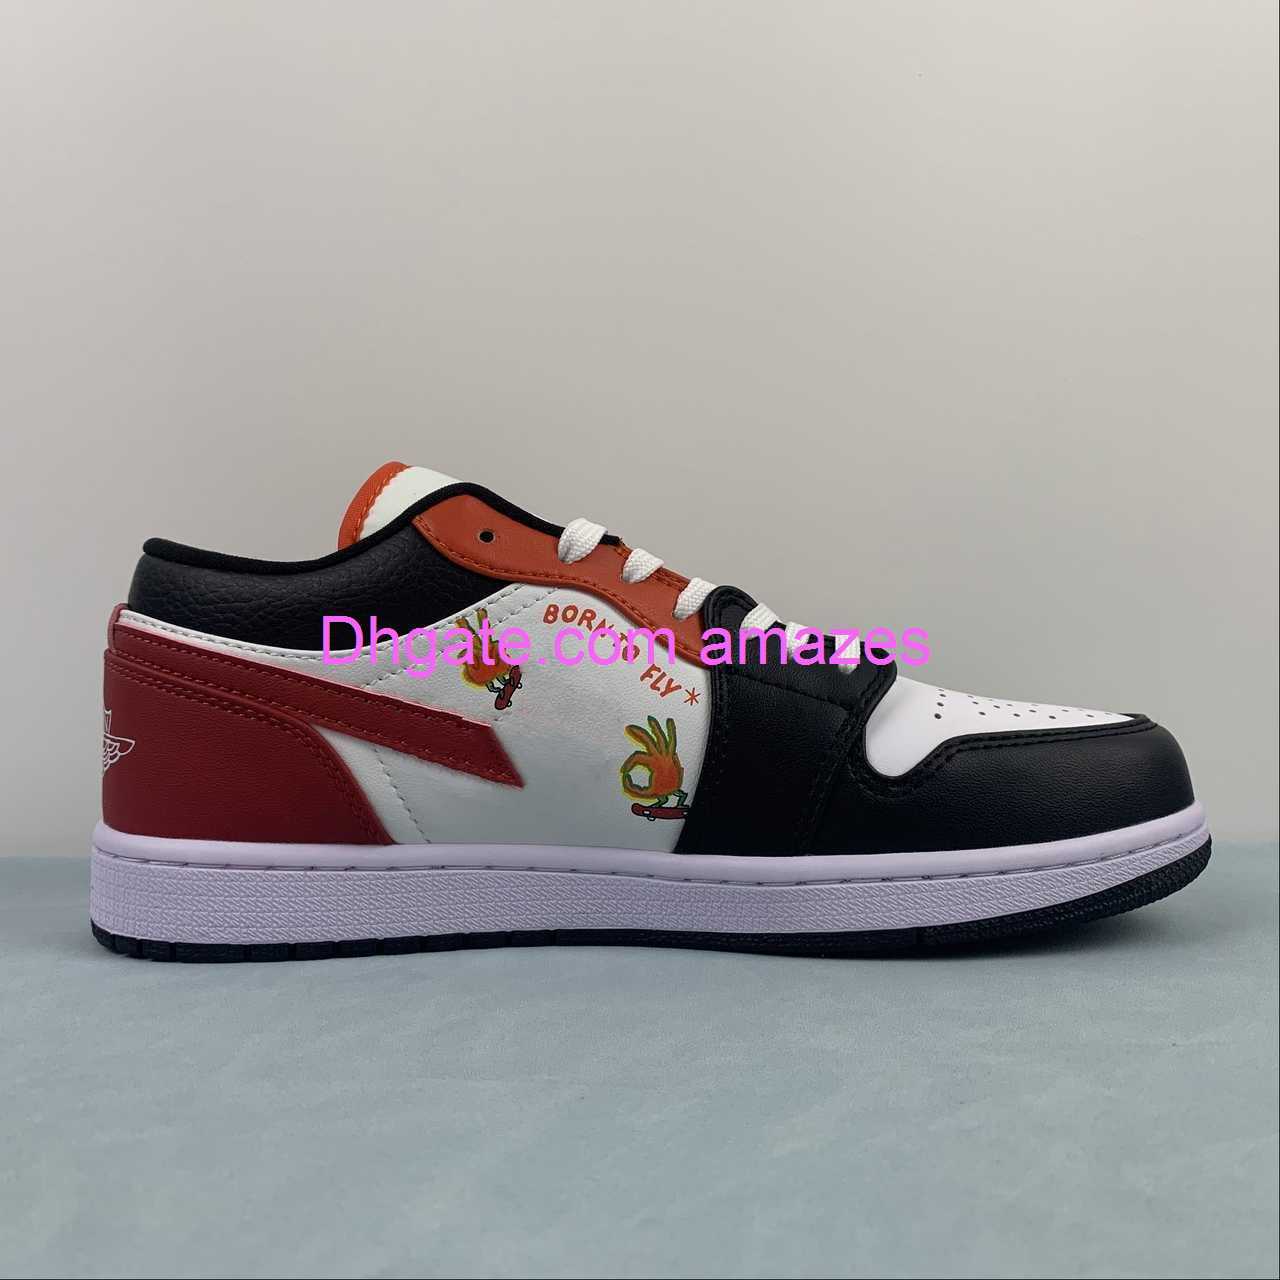 

New J1 Low 2023 SE Just Skate Gym Red GS Men Womens Running Shoes 1s White Black White Gym Red Team Sports Sneakers FJ7222-101 size US 4-12 EUR 36-46, Fn3722-801